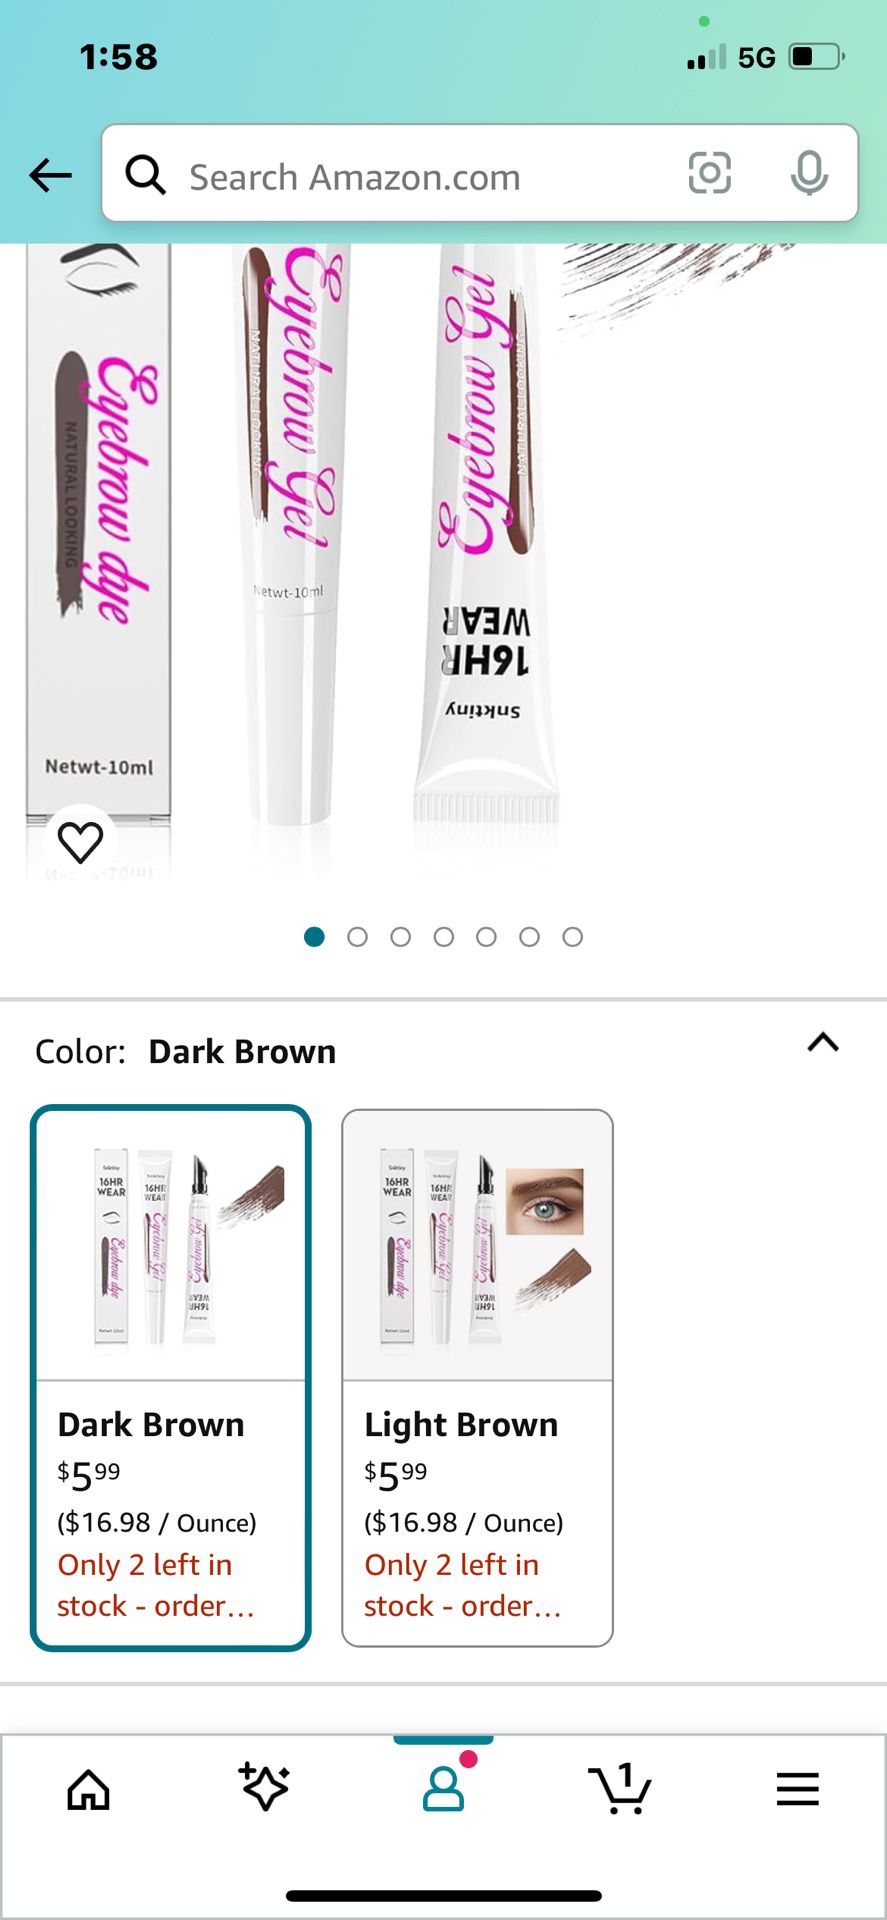 Eyebrow Gel with Eyebrow Brush - Eyebrow Pencil Brown with Non-Dry Design, Eye Brown Makeup Creates Natural Looking Brows Effortlessly and Stays on Al